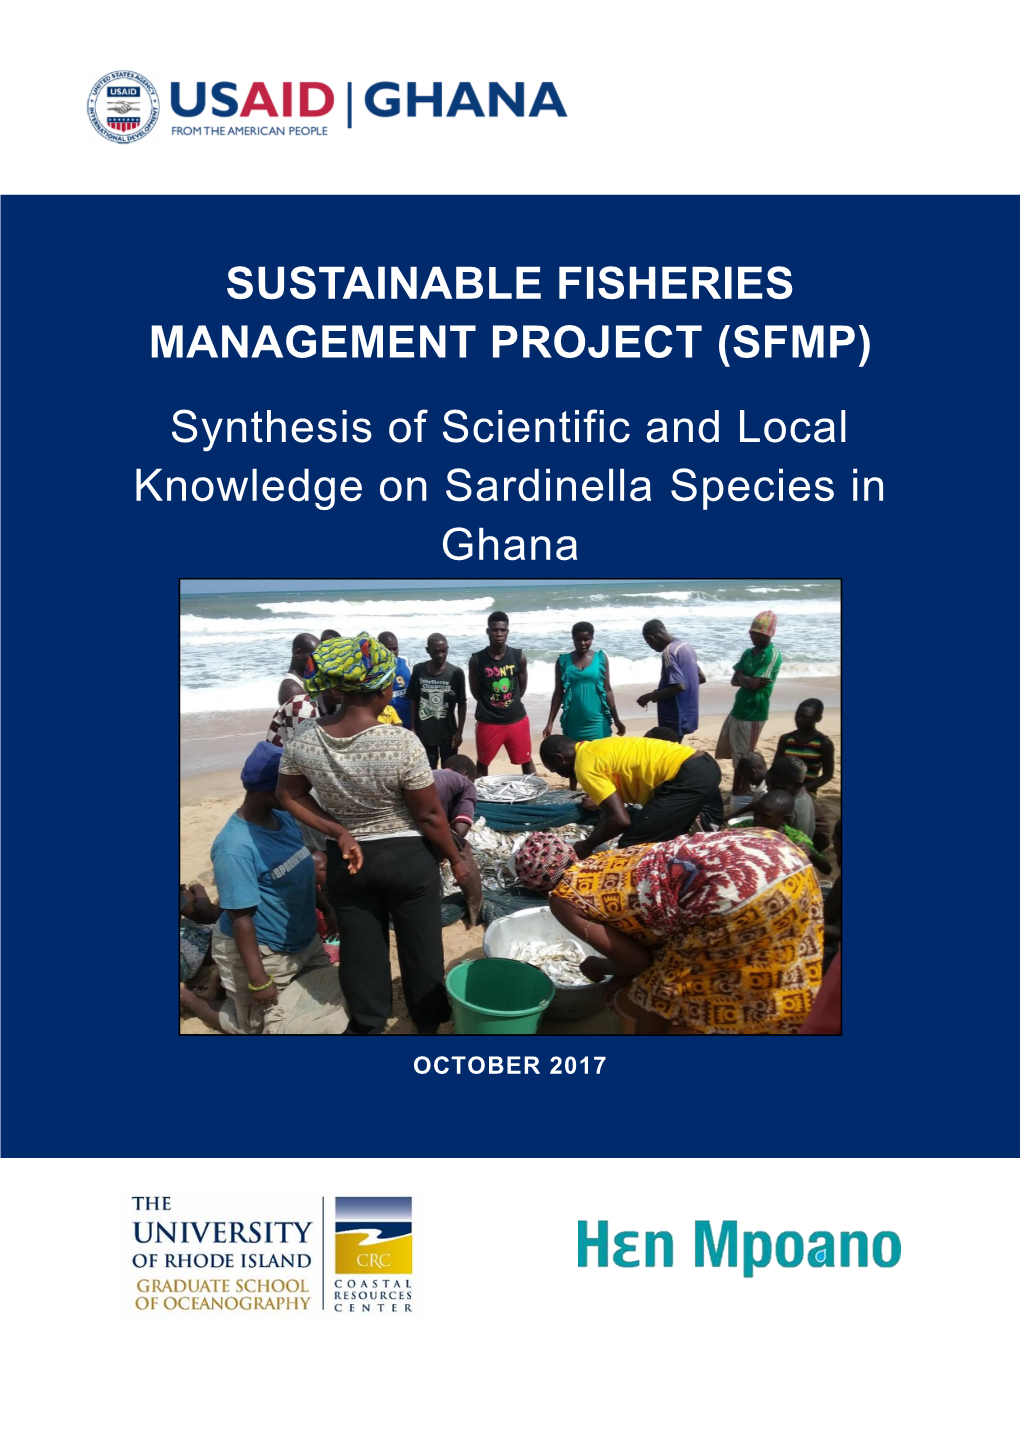 Synthesis of Scientific and Local Knowledge on Sardinella Species In